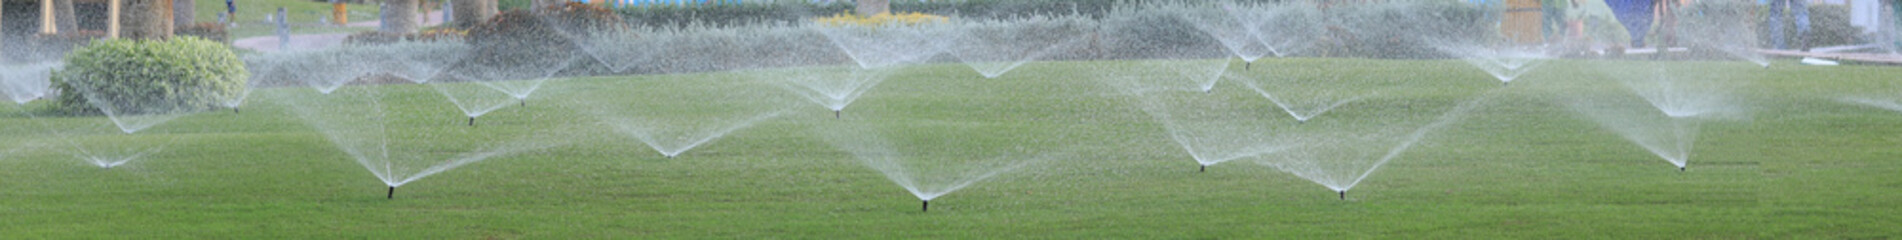 garden sprinkler while watering a green lawn